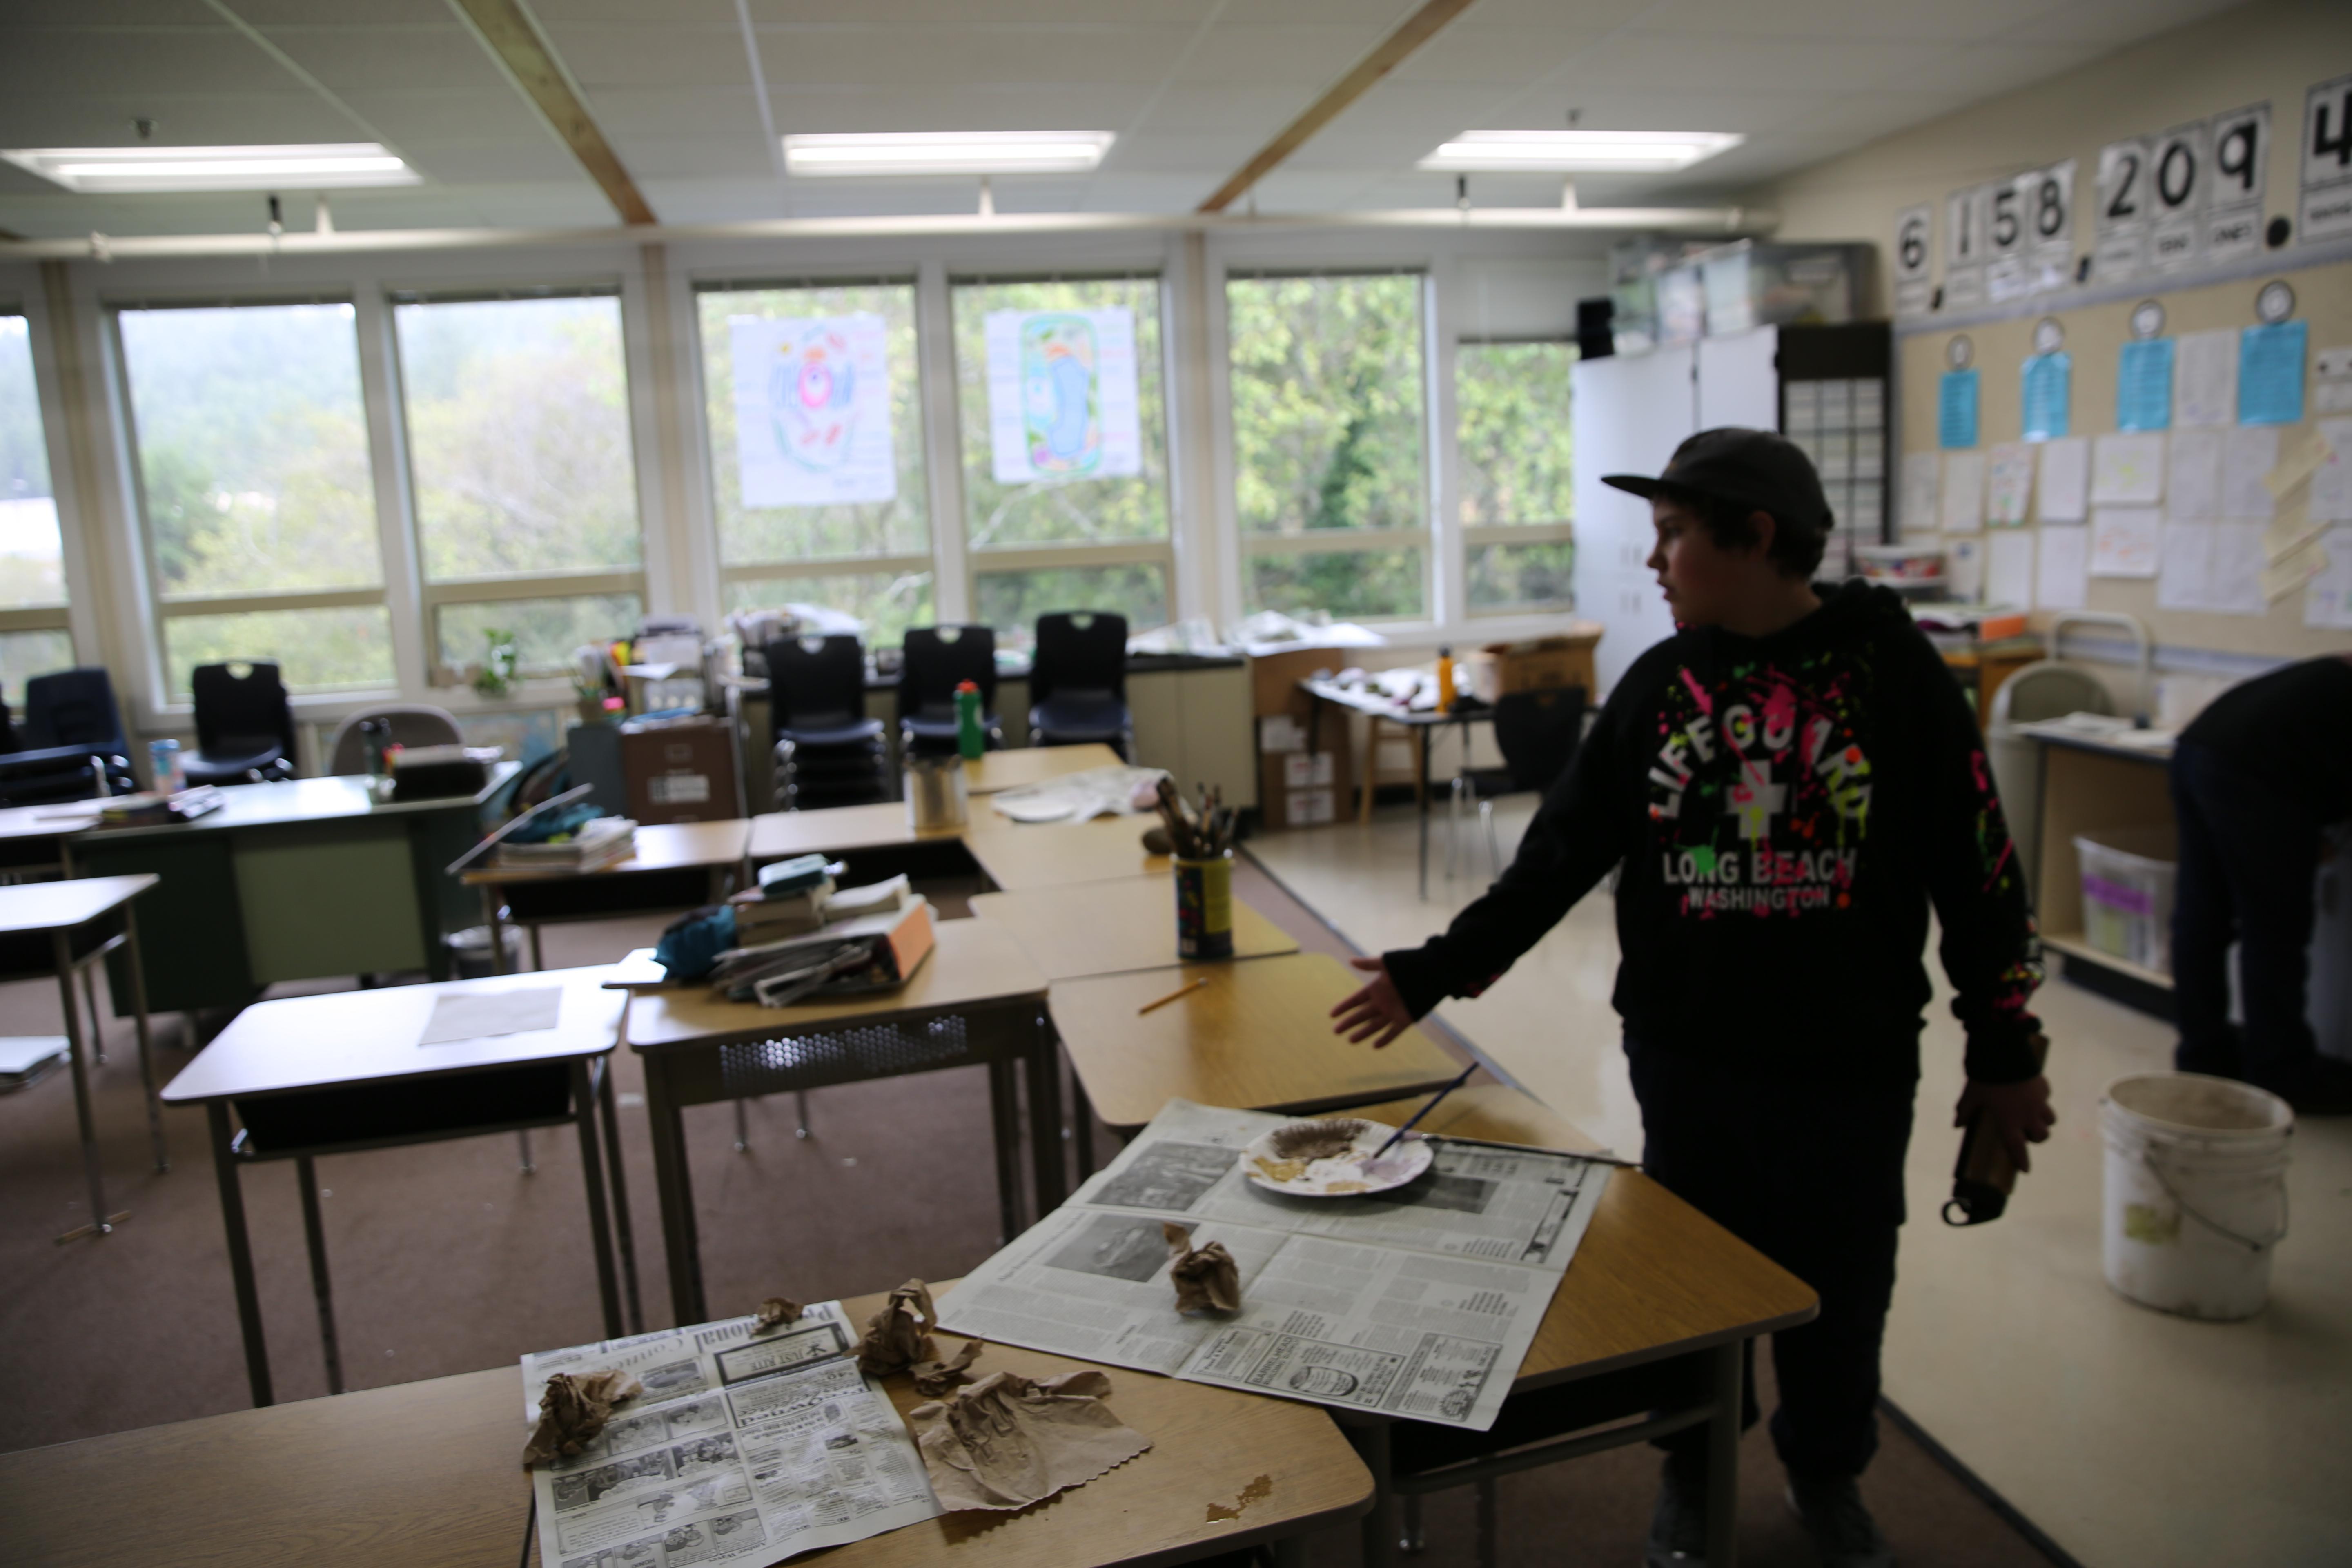 Class Of 2025 student Dale looks over an art project in his sixth grade classroom at Taft Elementary School in Lincoln City, in November 2018.